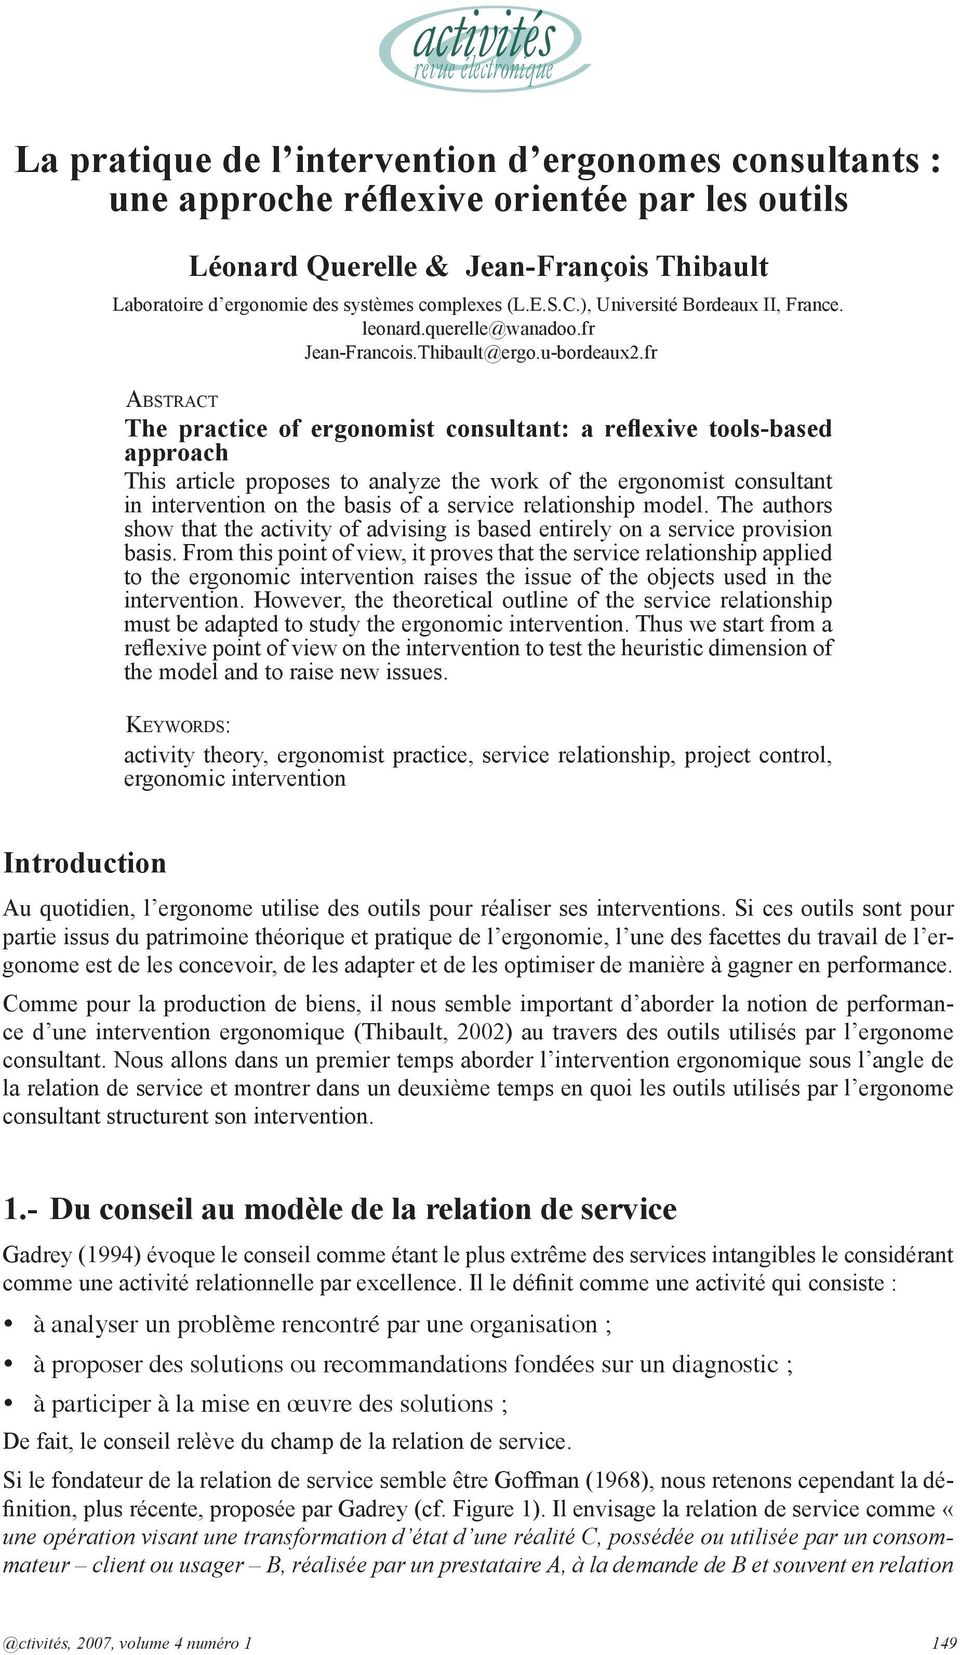 fr Abstract The practice of ergonomist consultant: a reflexive tools-based approach This article proposes to analyze the work of the ergonomist consultant in intervention on the basis of a service